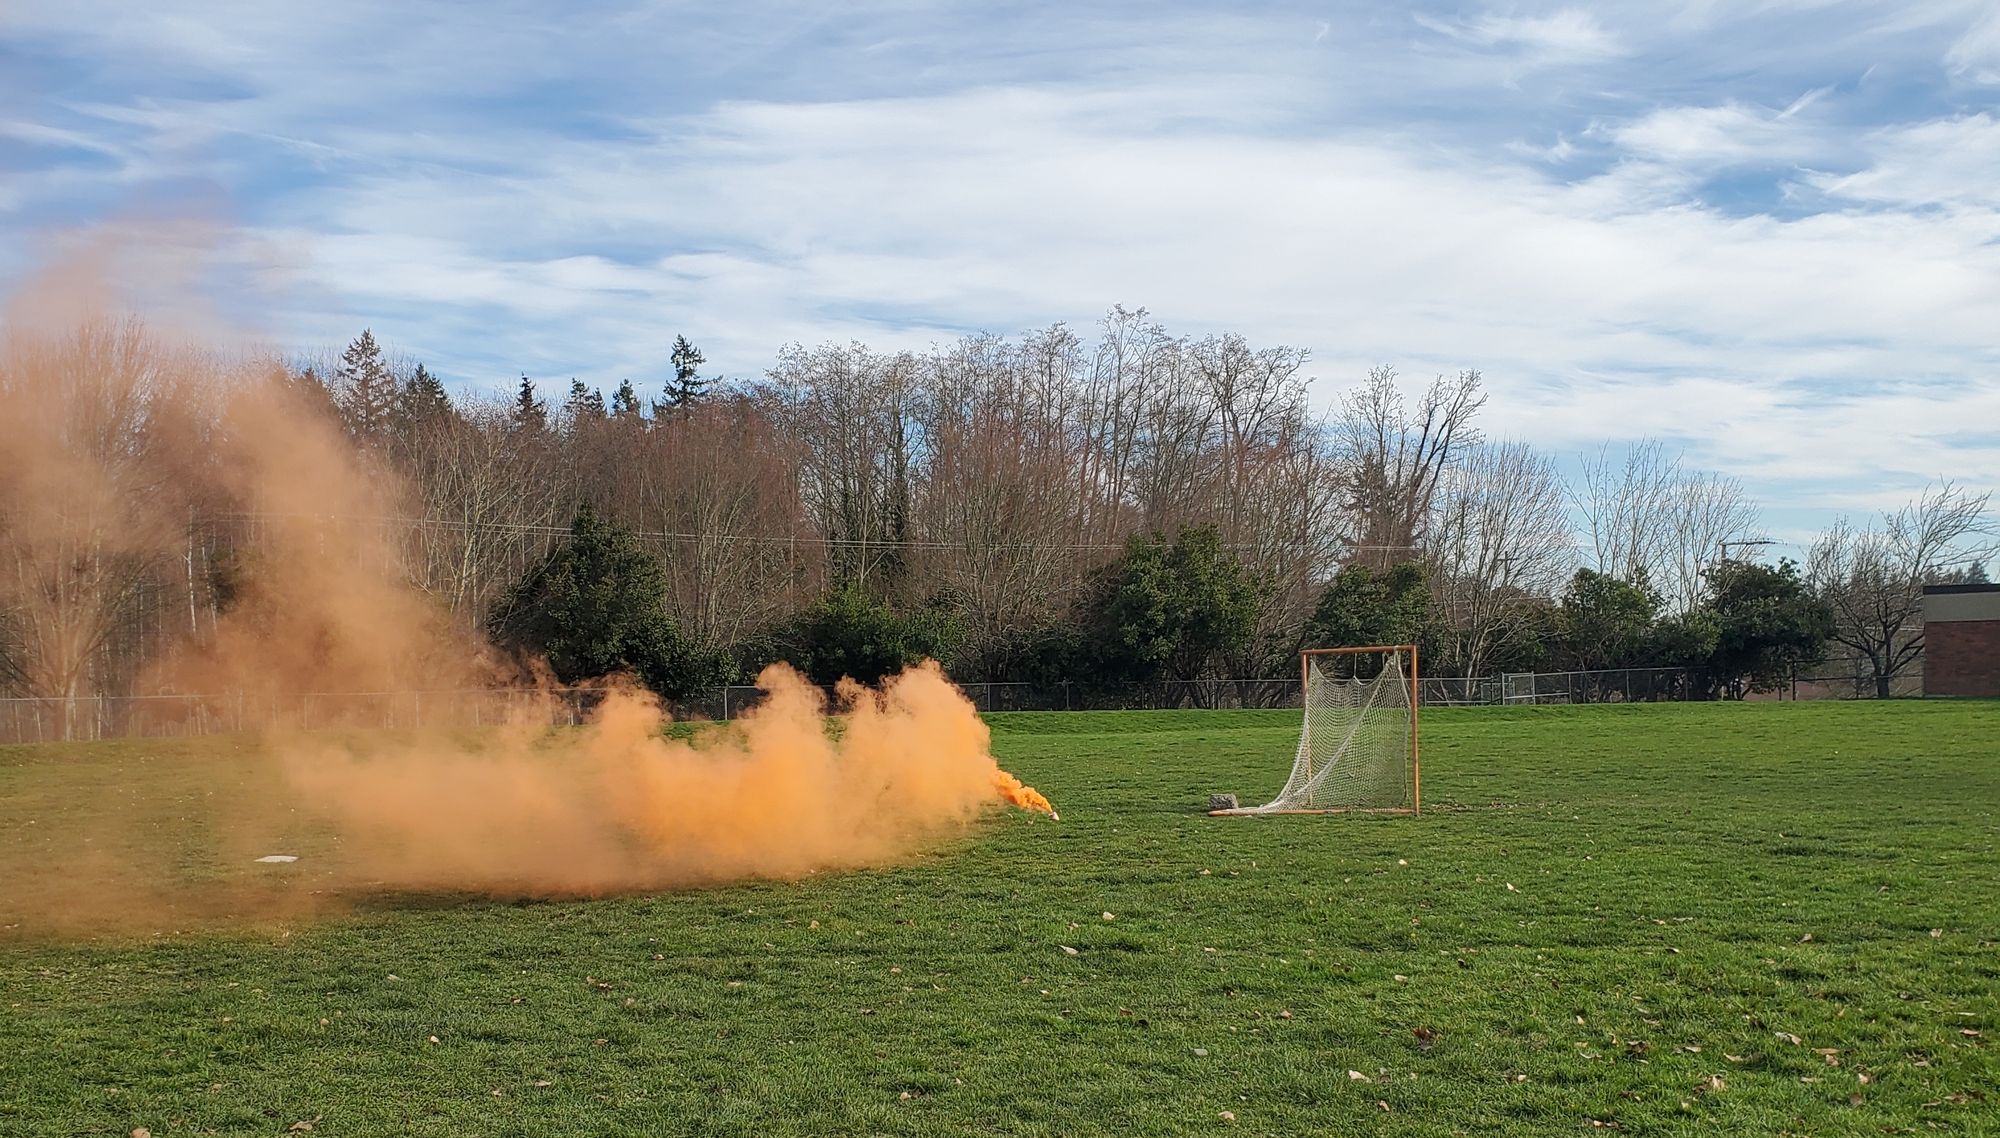 Orange smoke spreads across a field with a small netted goal nearby.